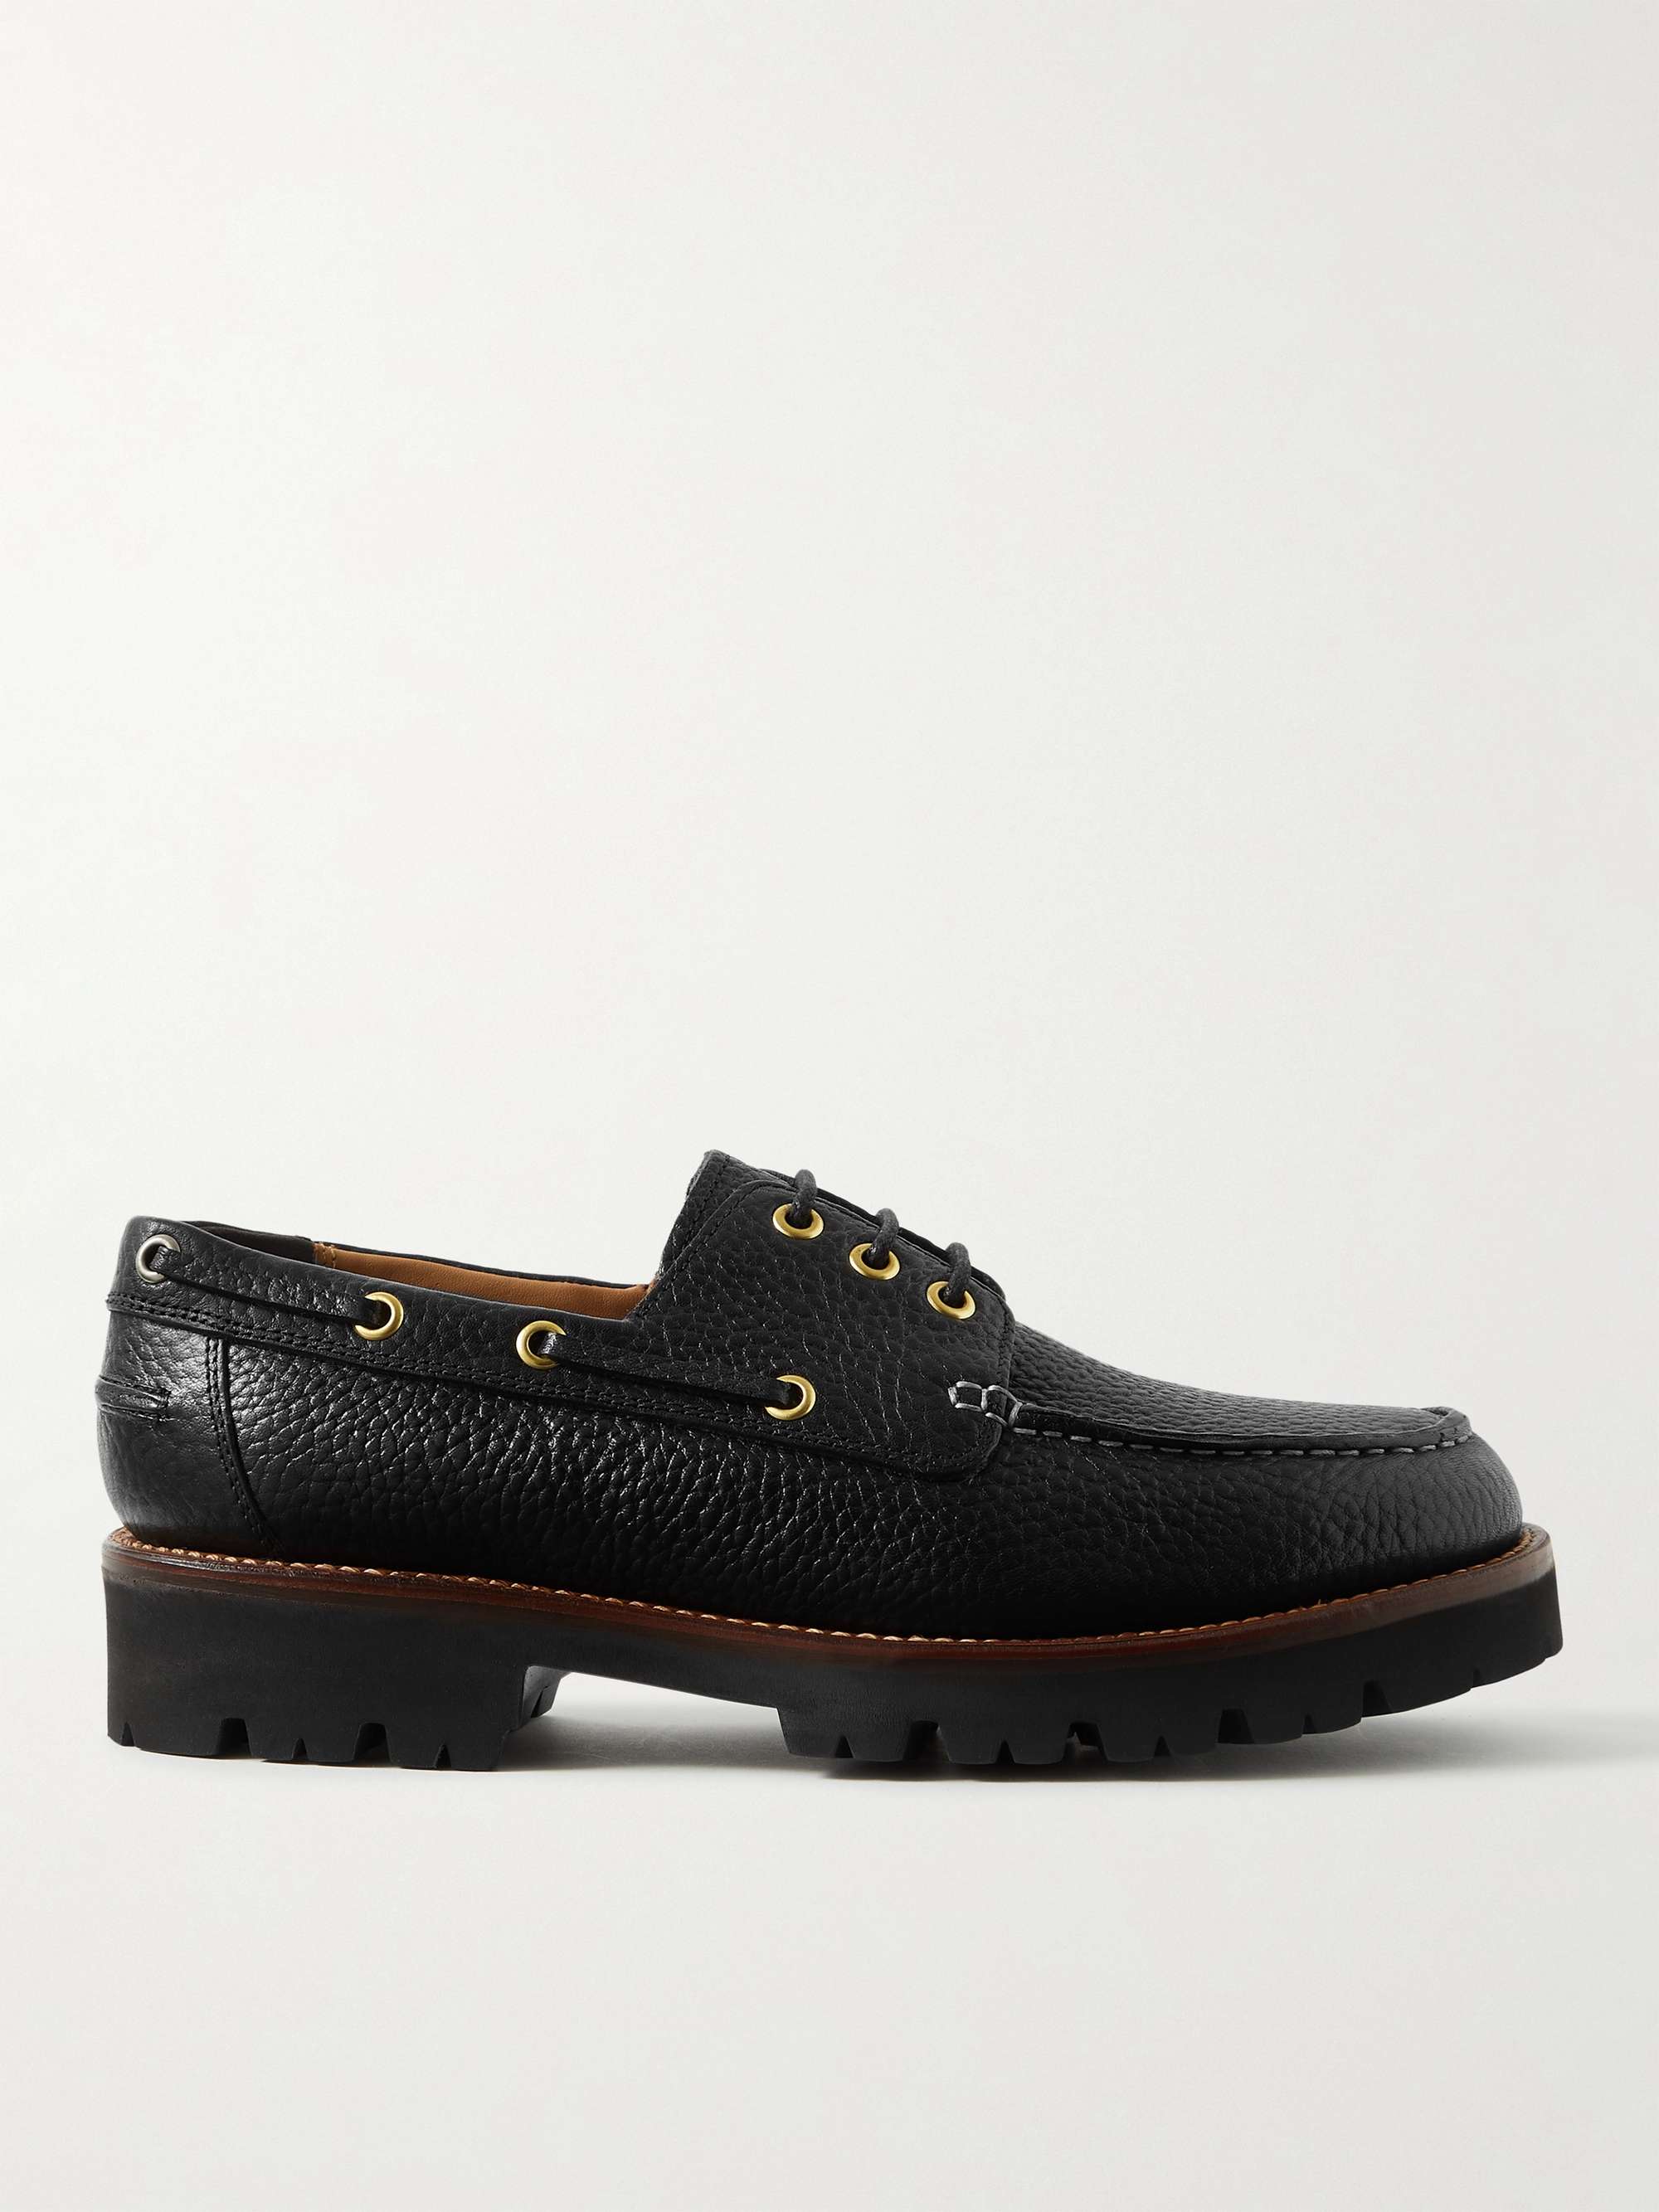 GRENSON Dempsey Full-Grain Leather Boat Shoes